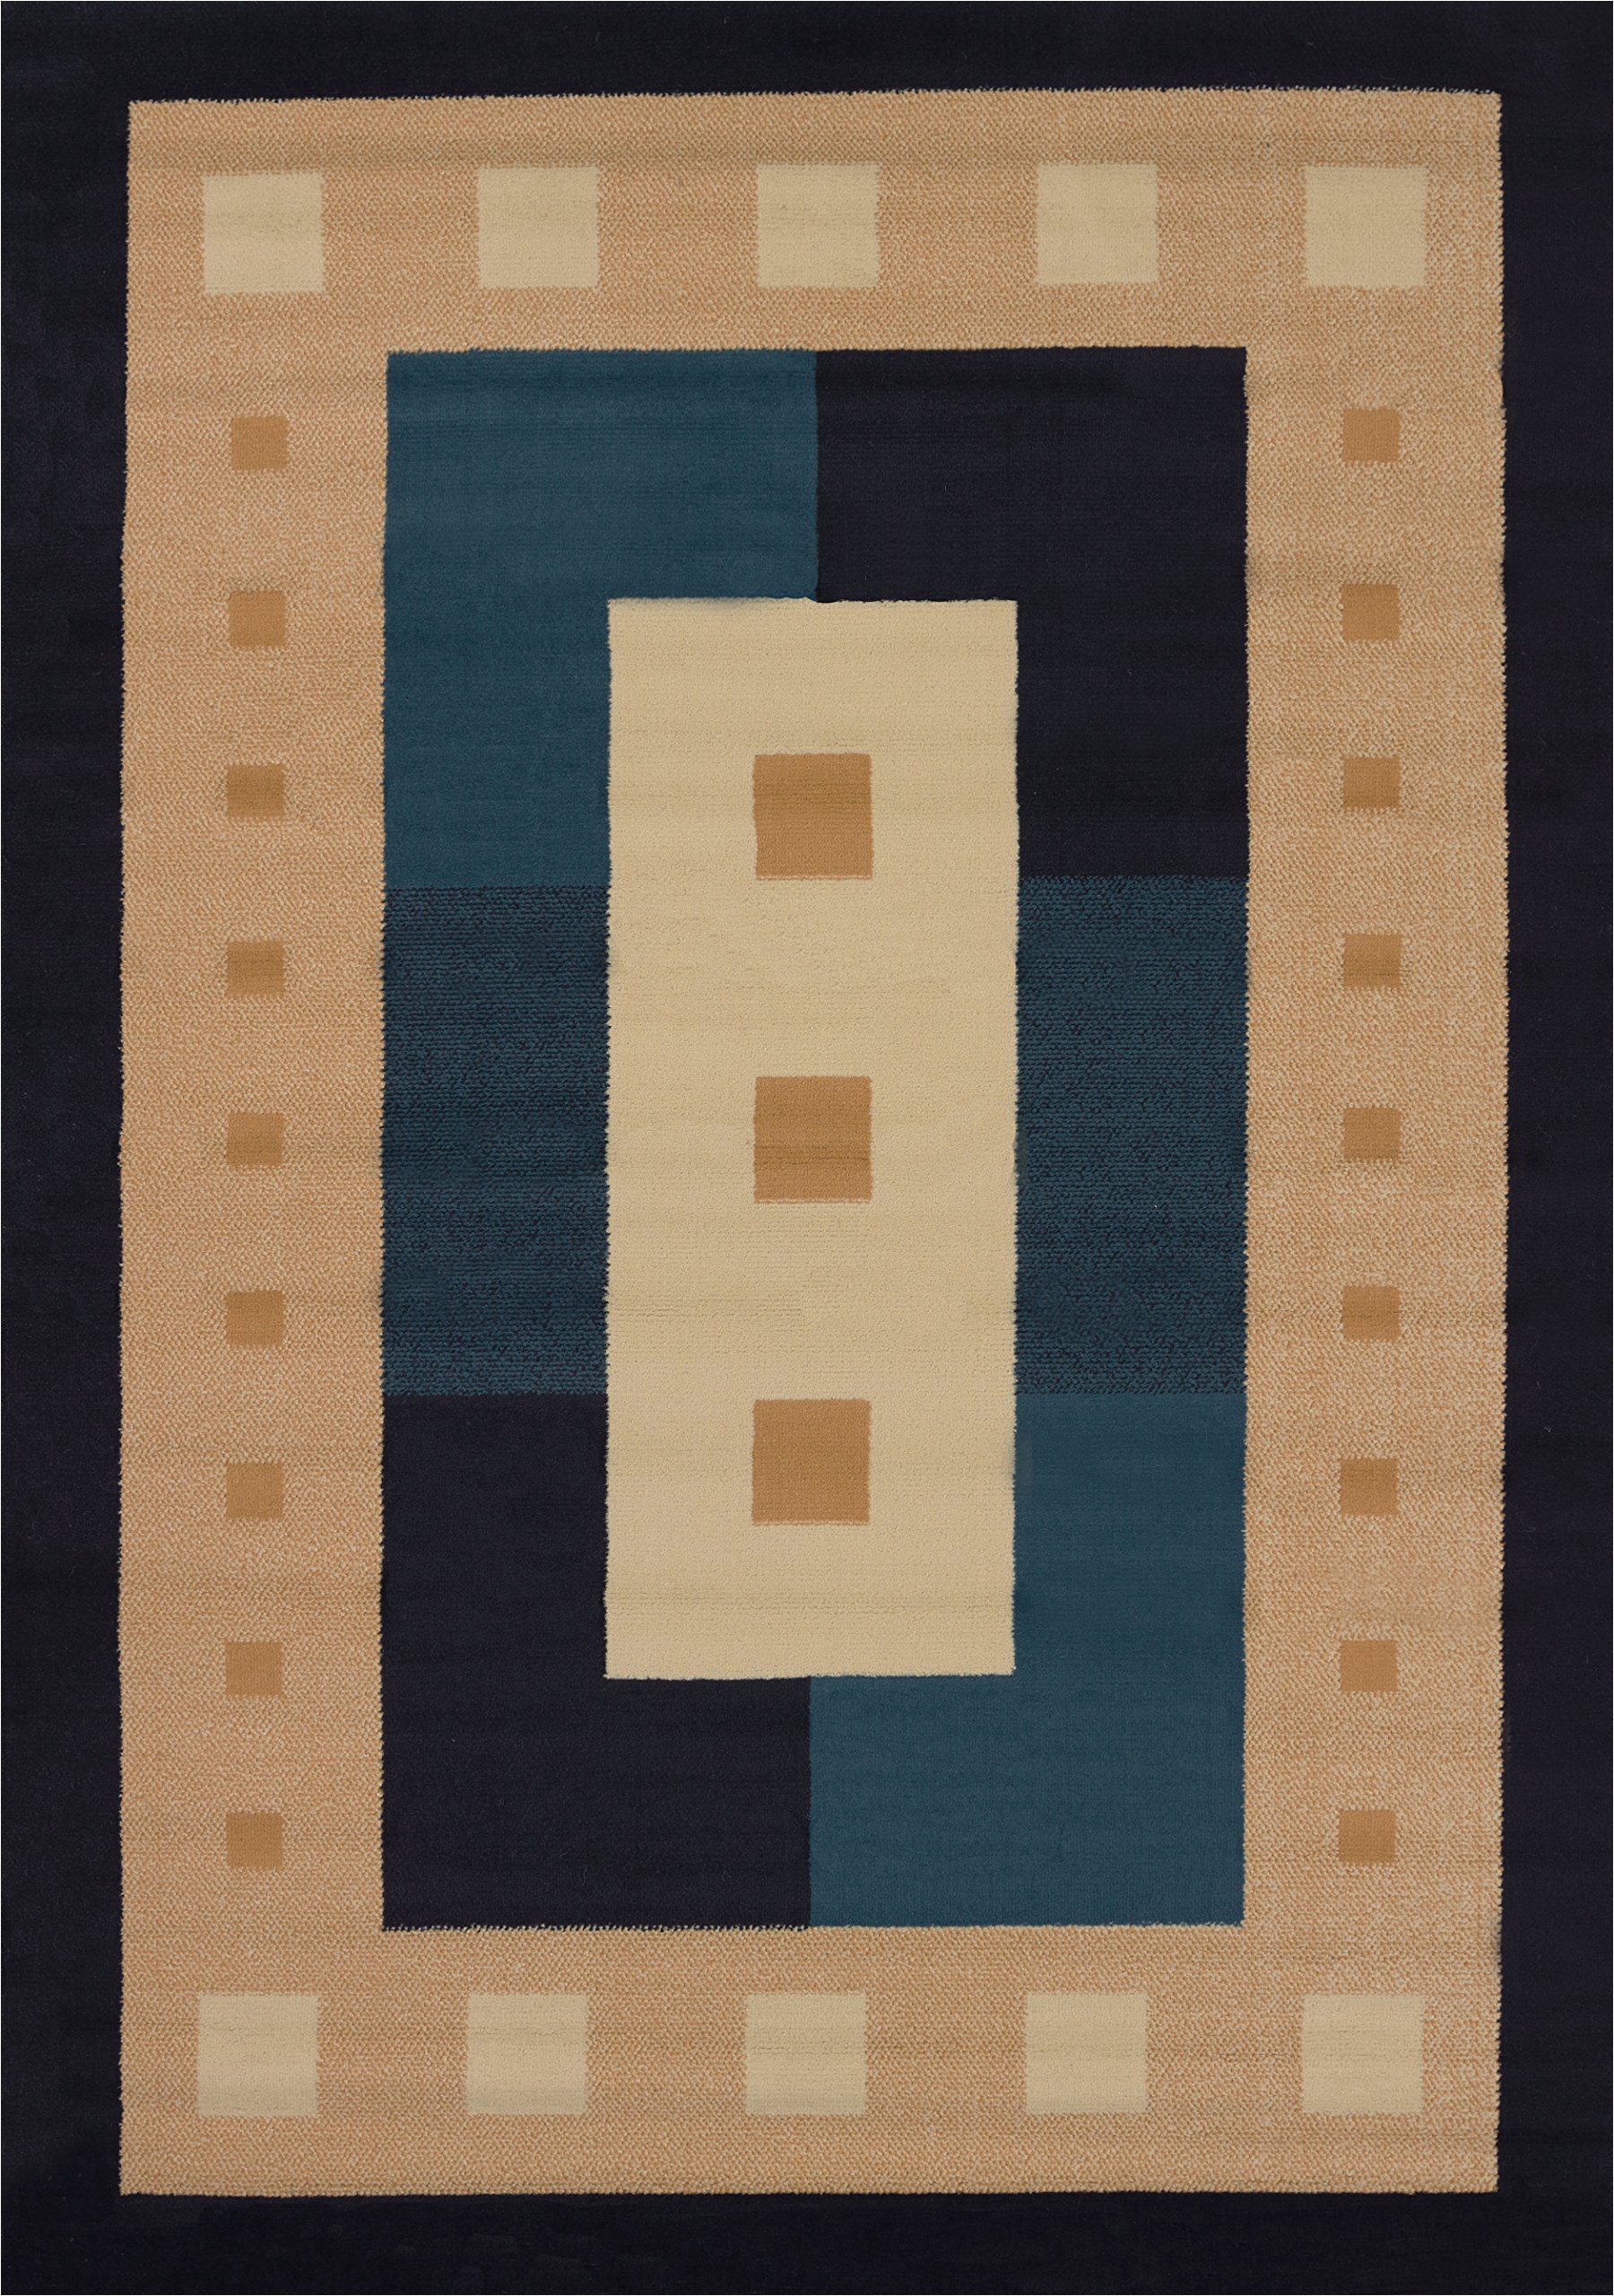 5 Ft Square area Rugs United Weavers Of America Time Square area Rug In Navy 7 Ft 6 In L X 5 Ft 3 In W